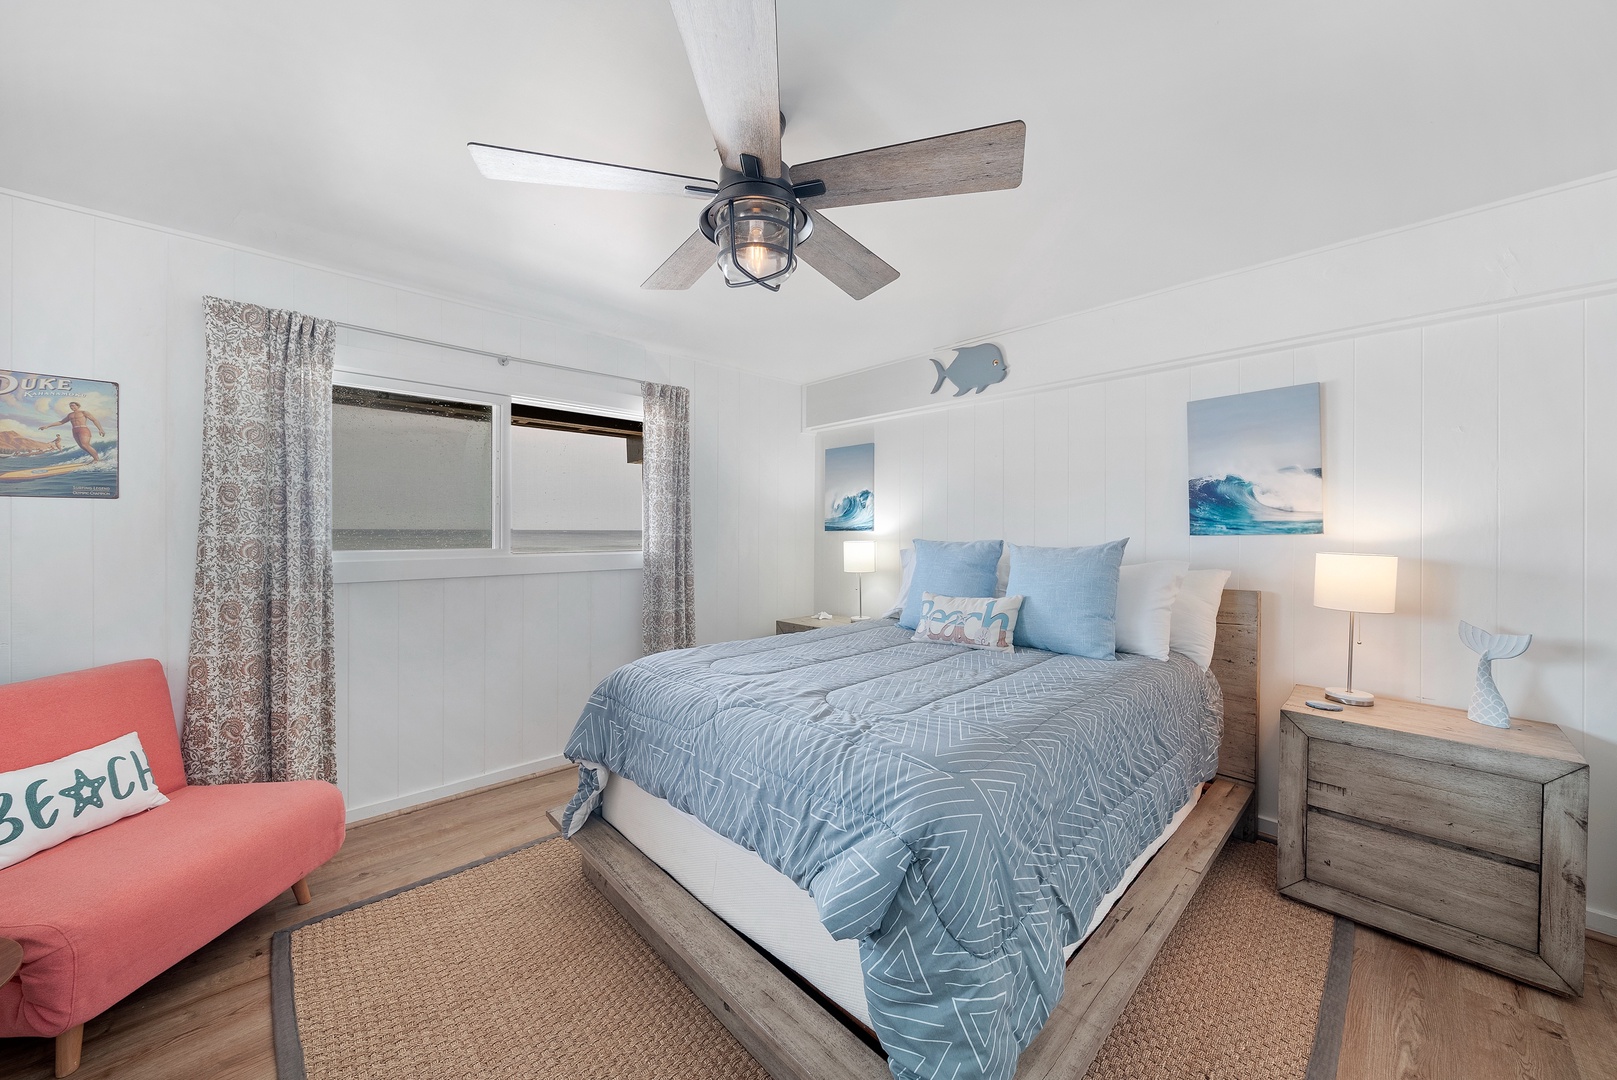 Haleiwa Vacation Rentals, Surfer's Paradise - Guest bedroom 2